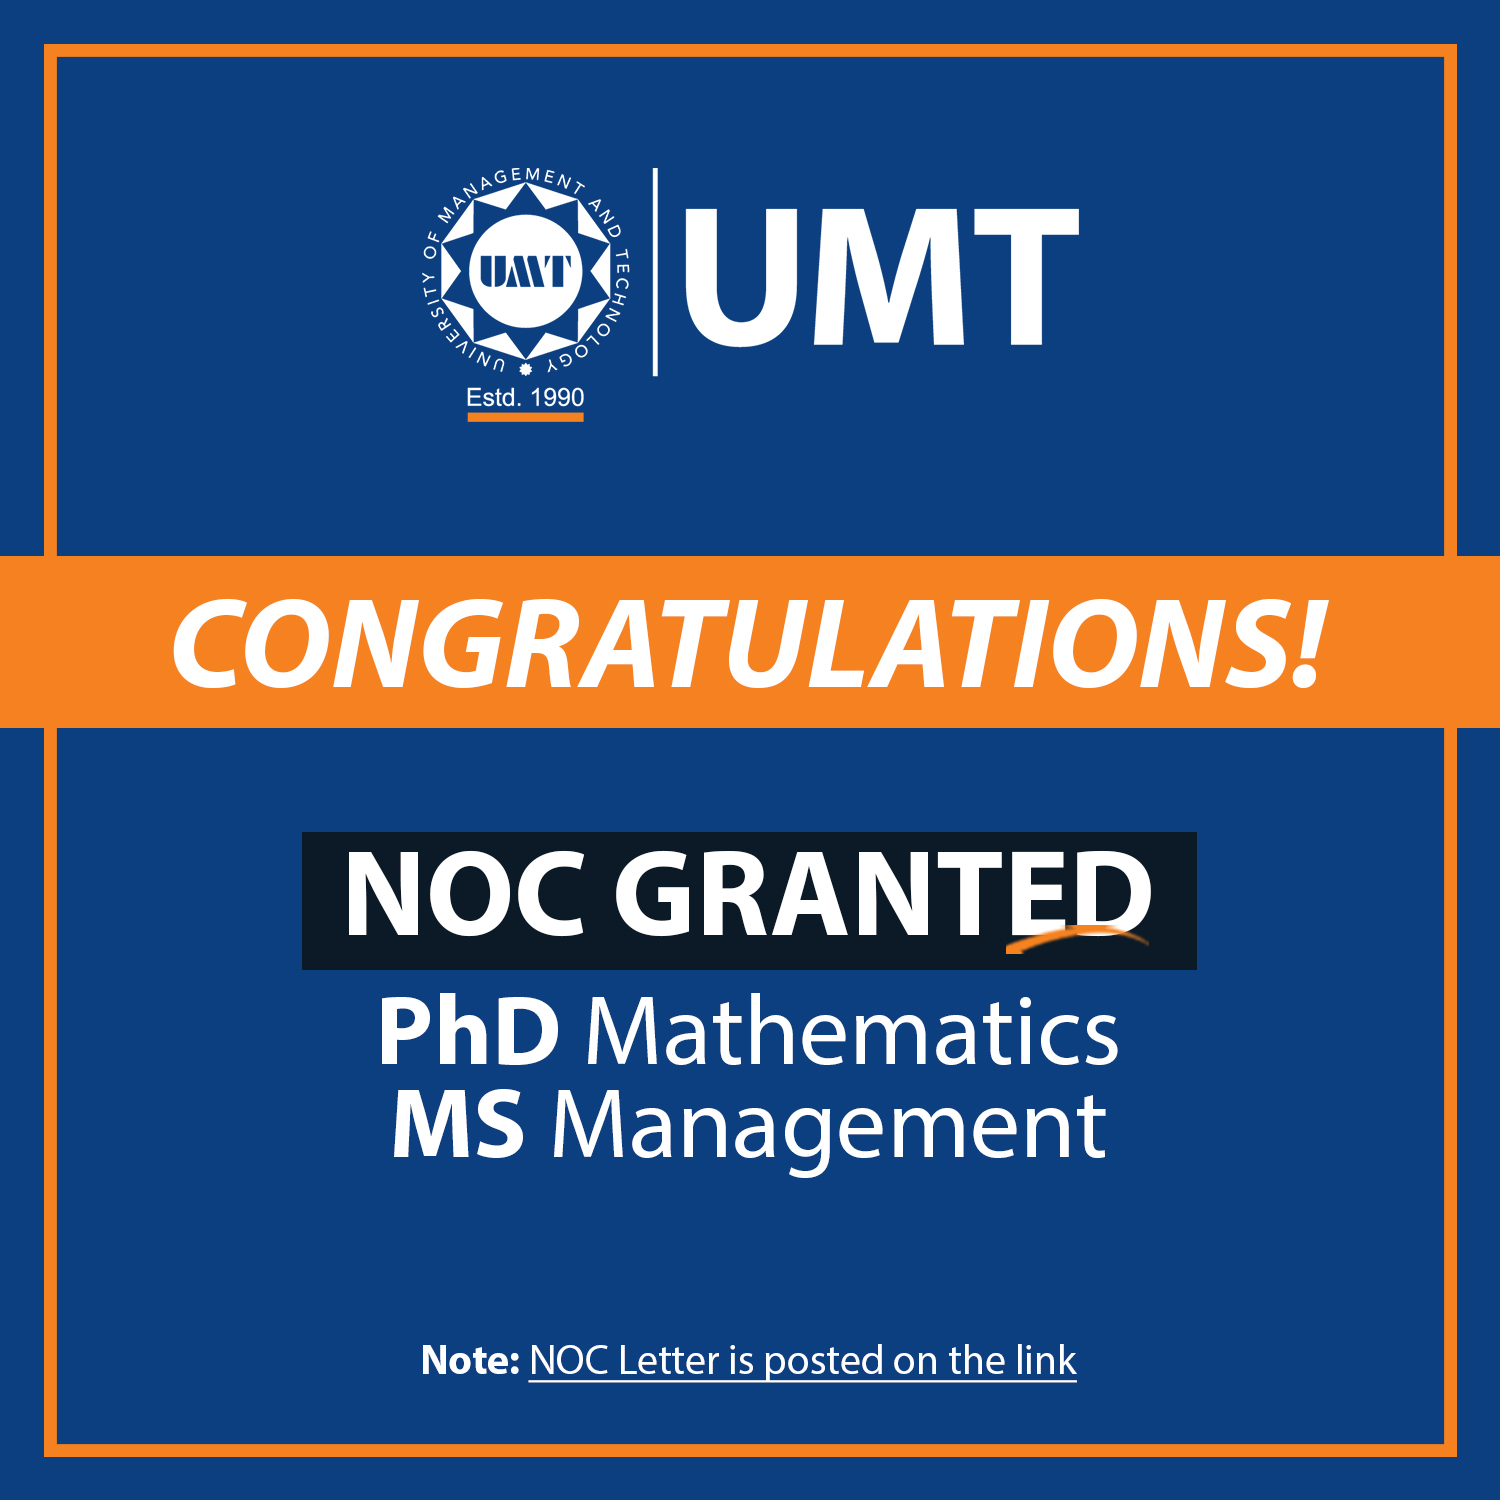 NOC Granted for PhD Mathematics and MS Management Programs